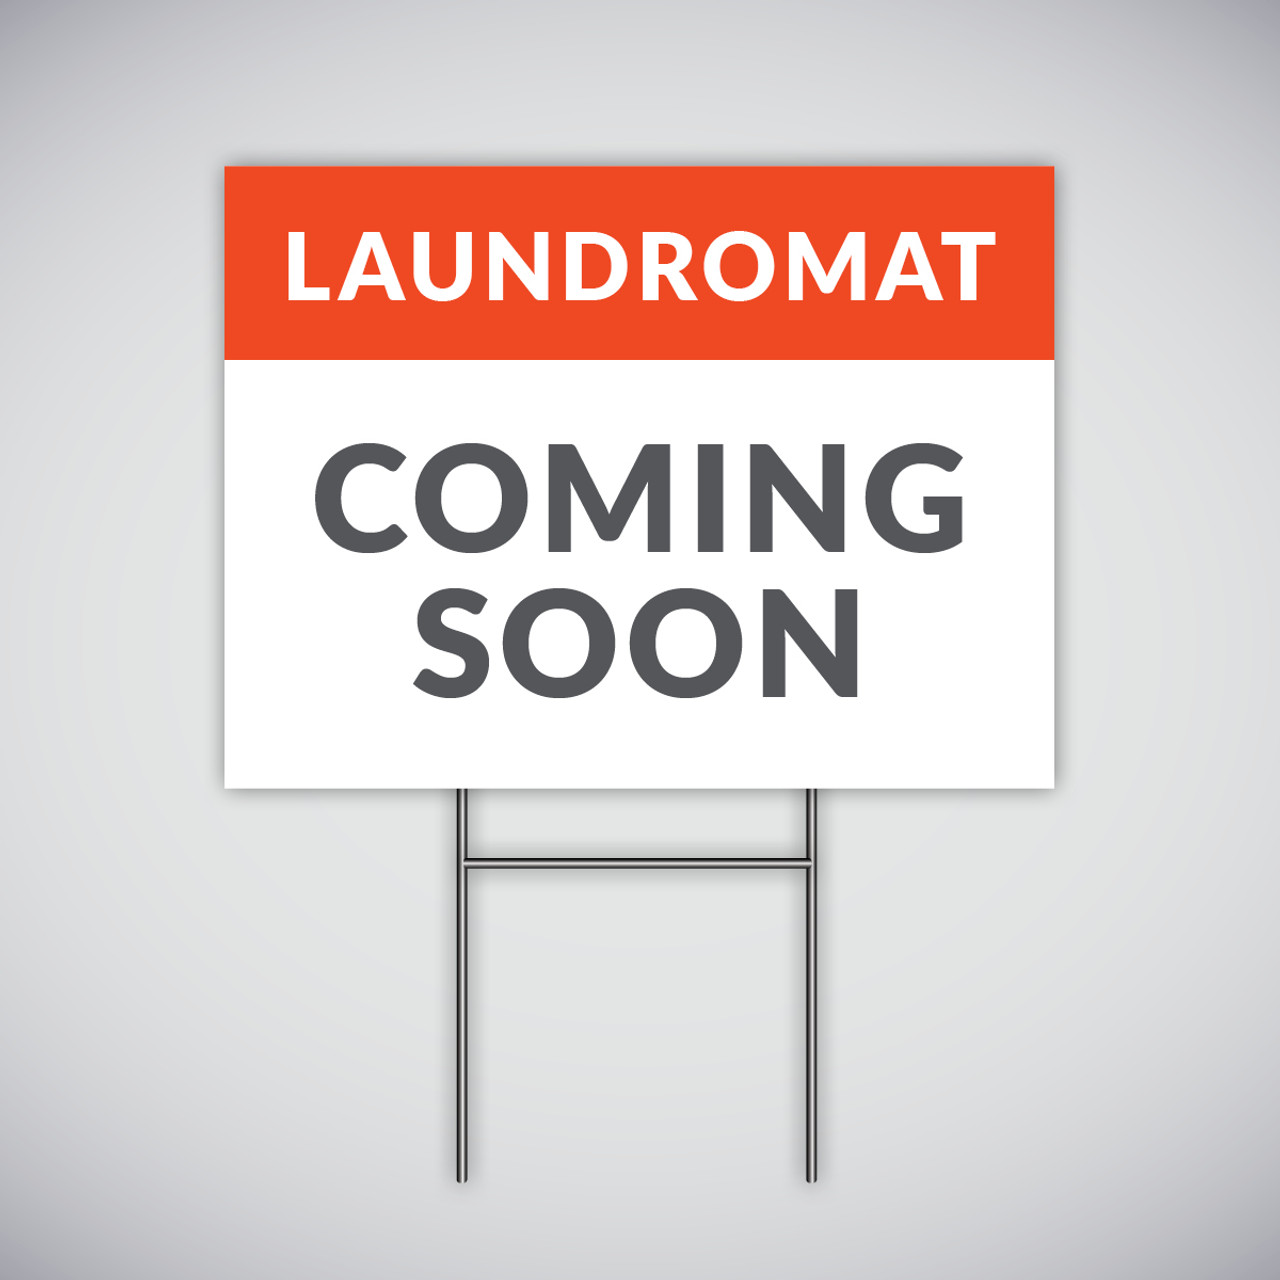 Laundromat Coming Soon Yard Sign - Red